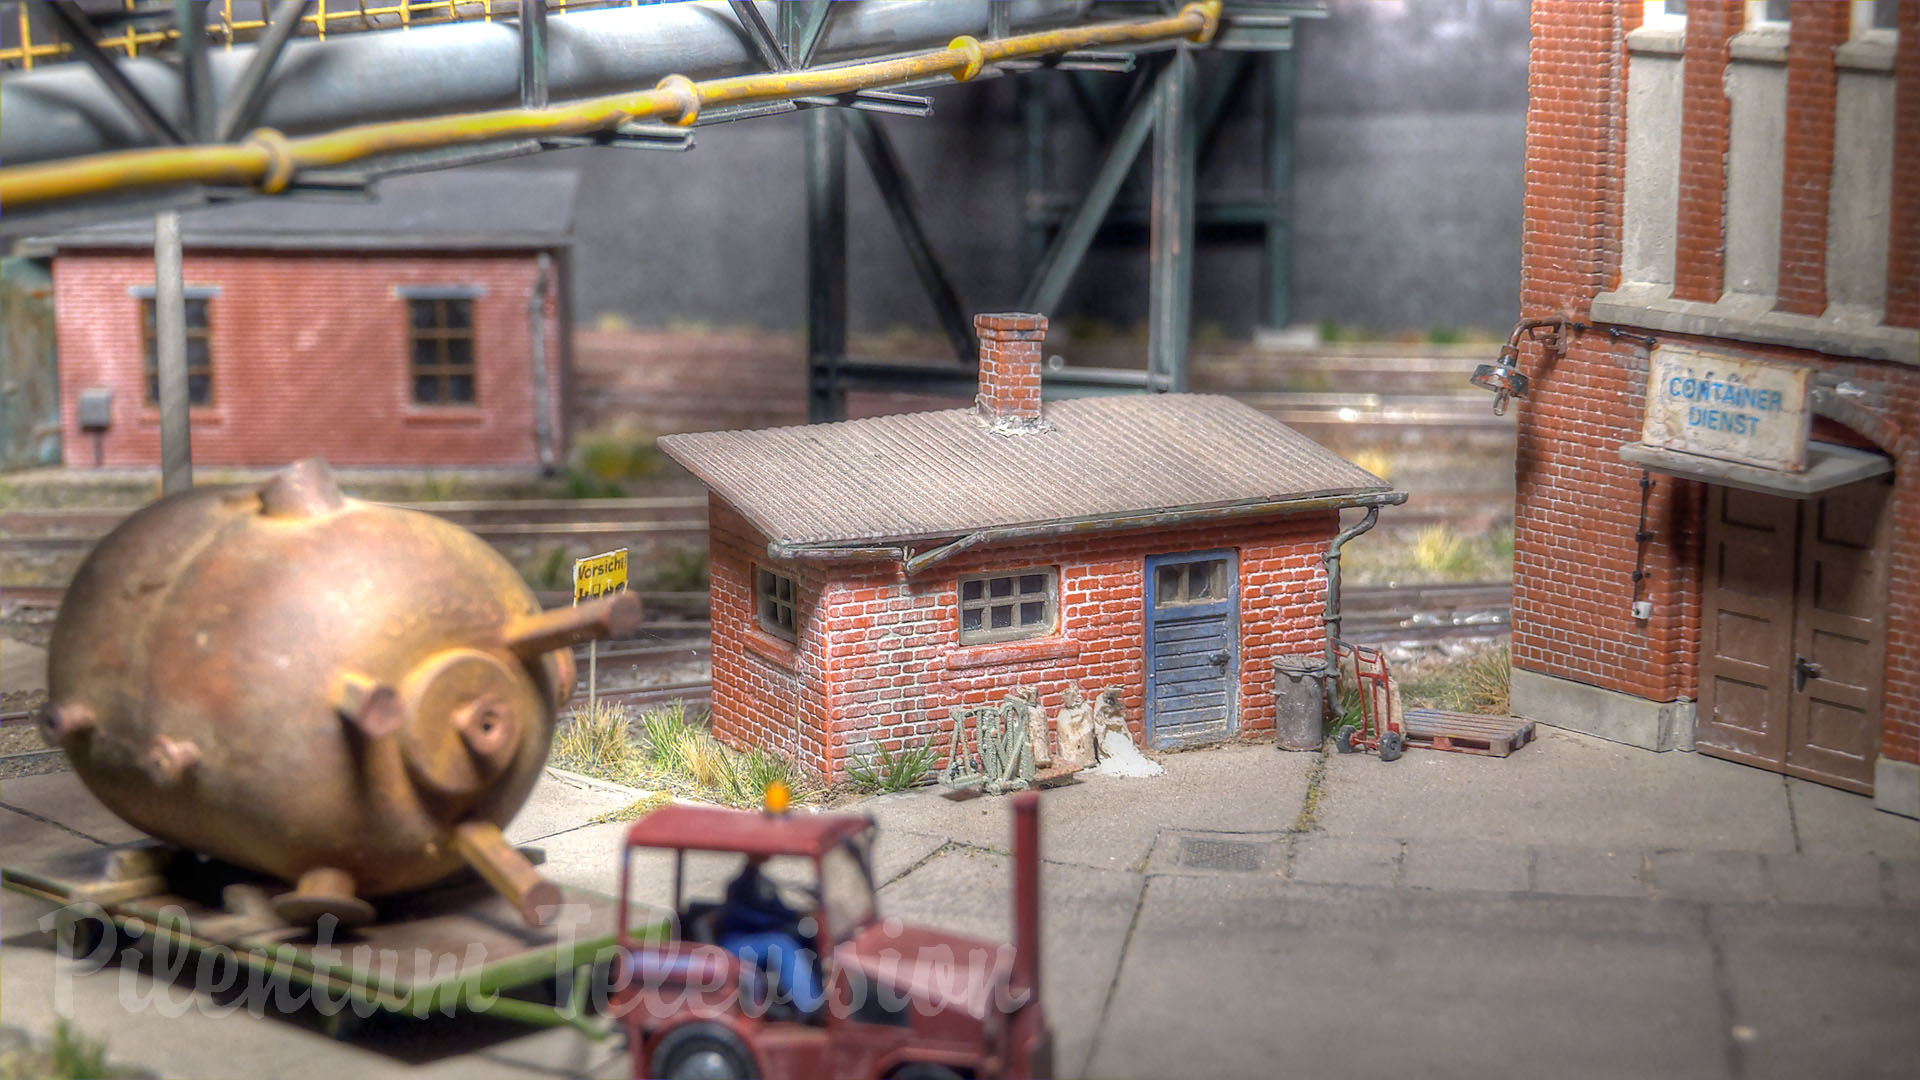 One of the most authentic model railroads of an East German chemical plant with industrial railways